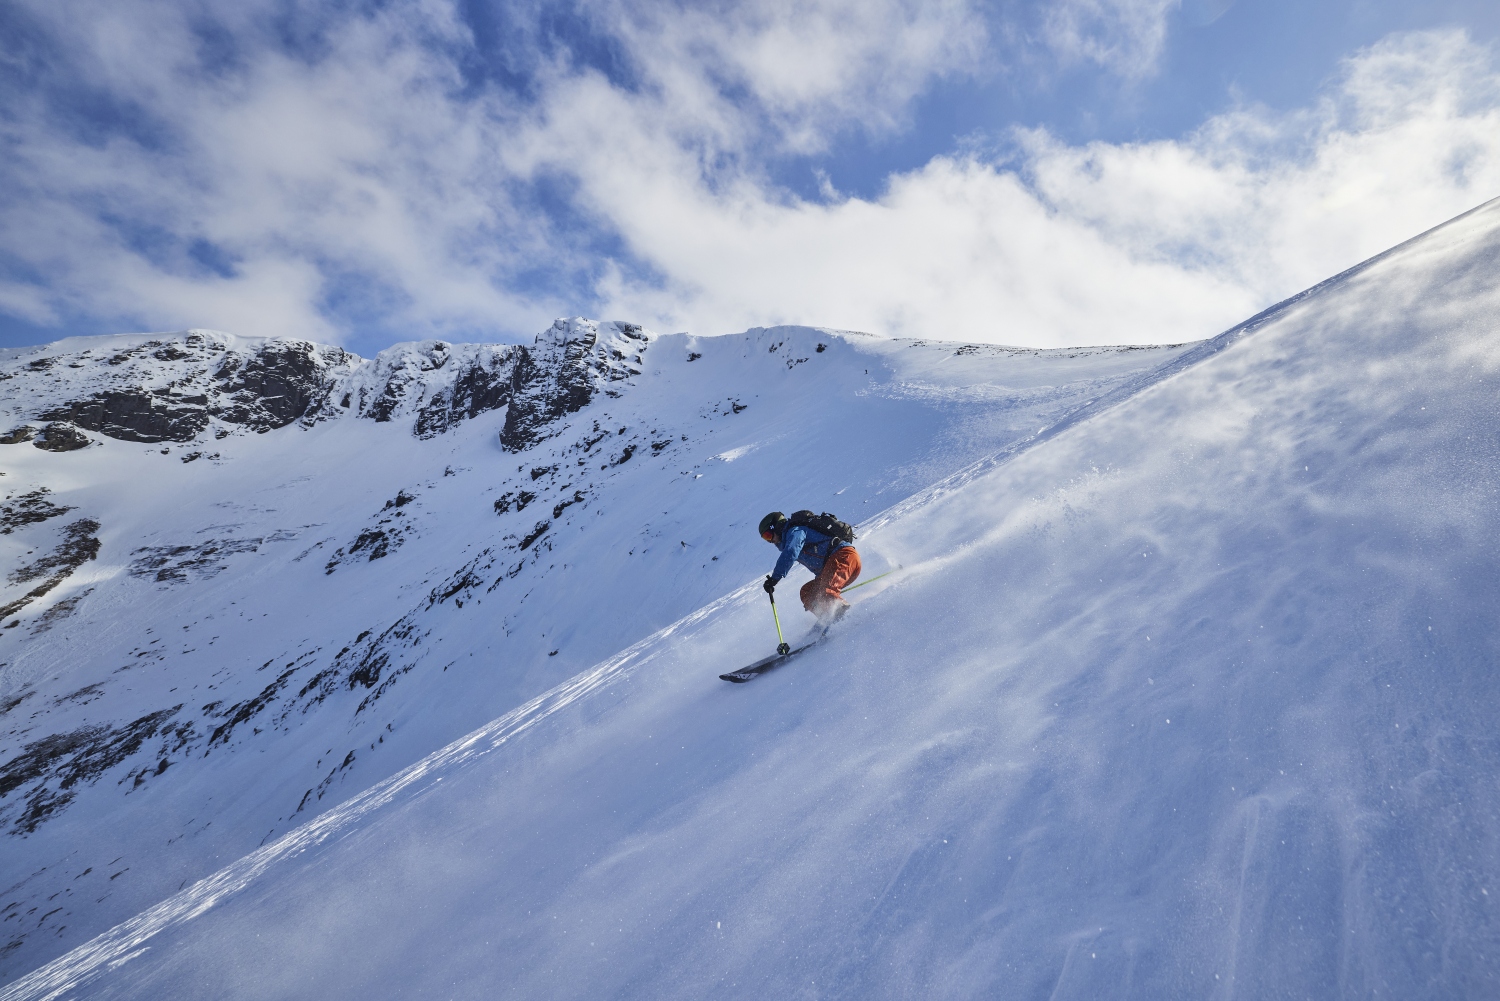 https://www.snowmagazine.com/images/features/skills/Skier%20riding%20down%20slope%20with%20snow%20blowing%20across%20plain_Scottish%20Ski%20Touring_CREDIT%20EdSmith_WildSki22_HighRes%2042.jpg?t=1670325457427